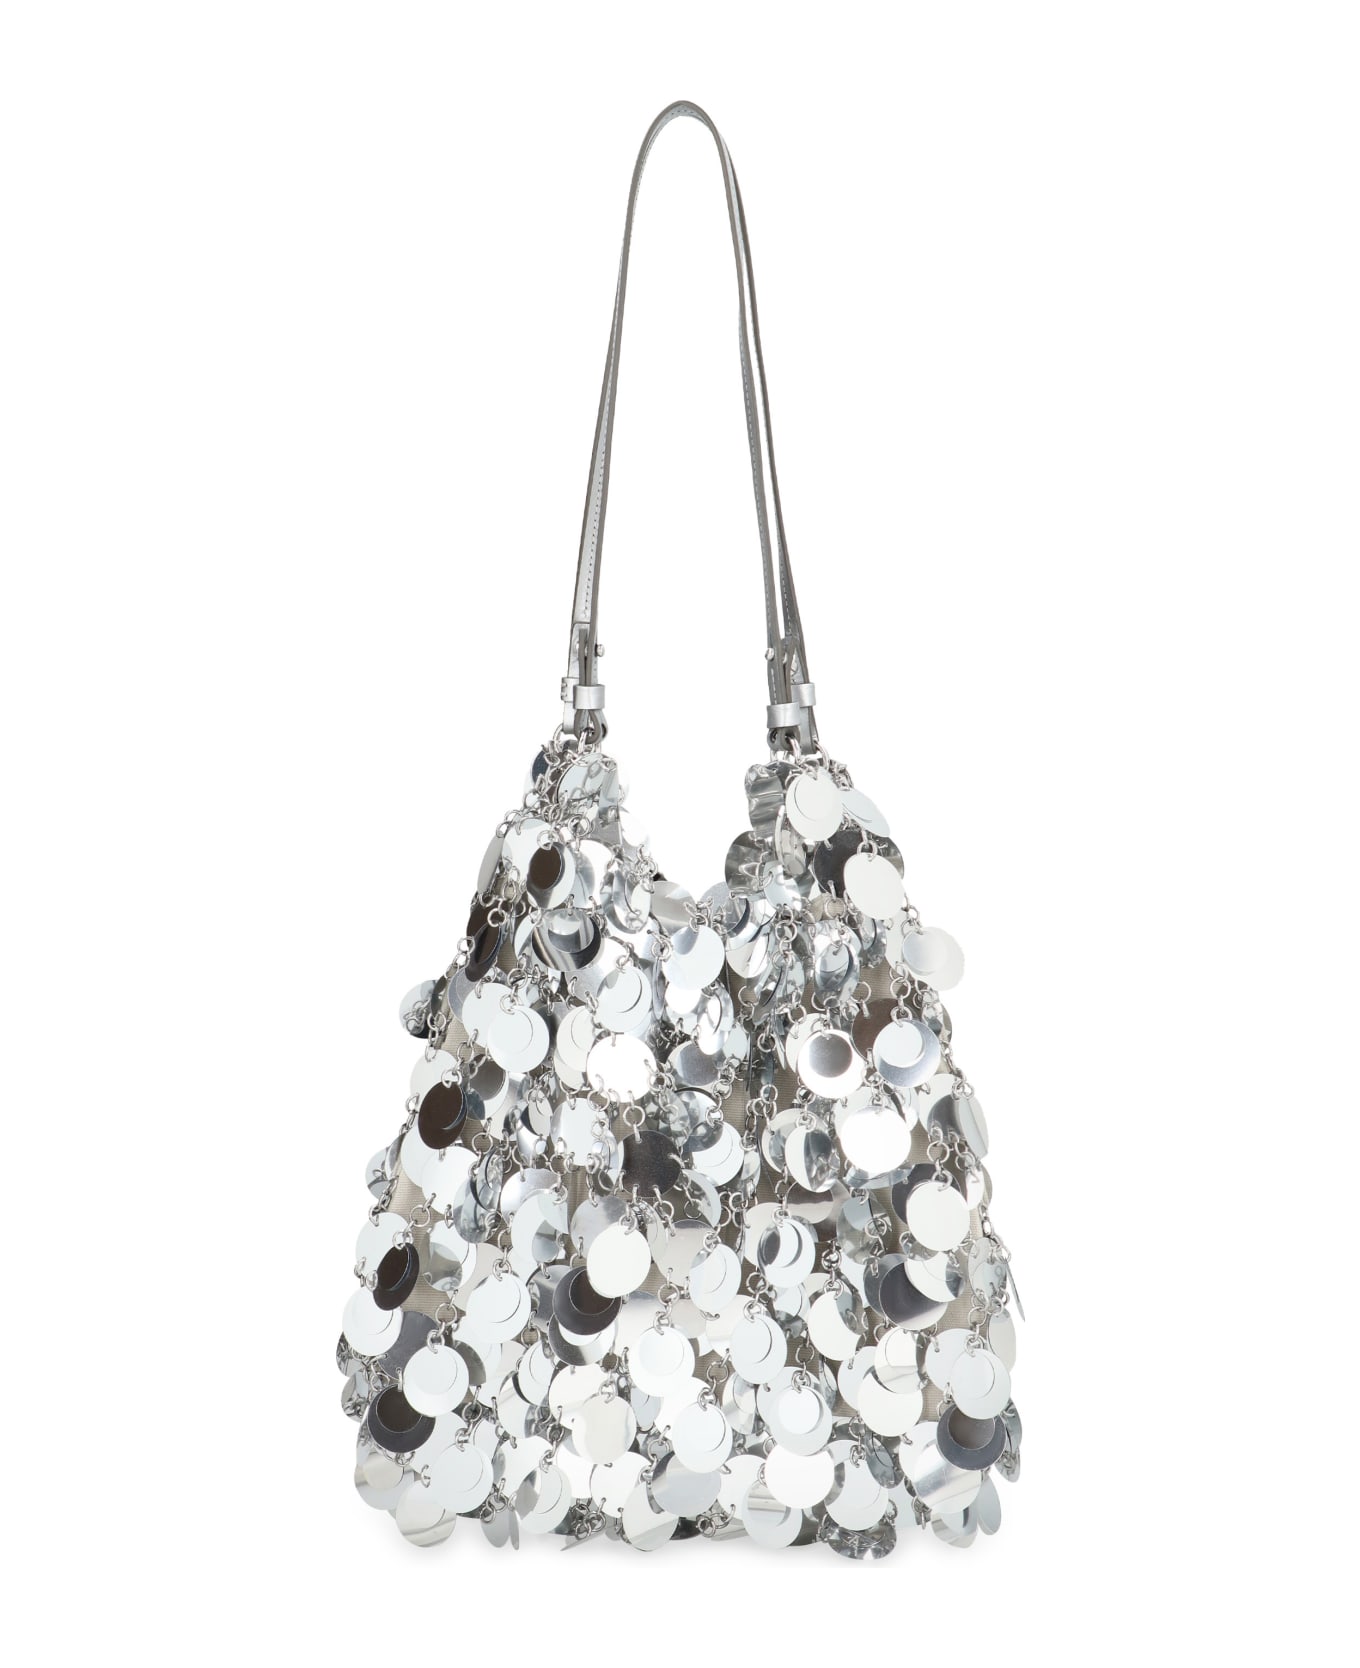 Paco Rabanne Sparkles Tote Bag - silver ショルダーバッグ